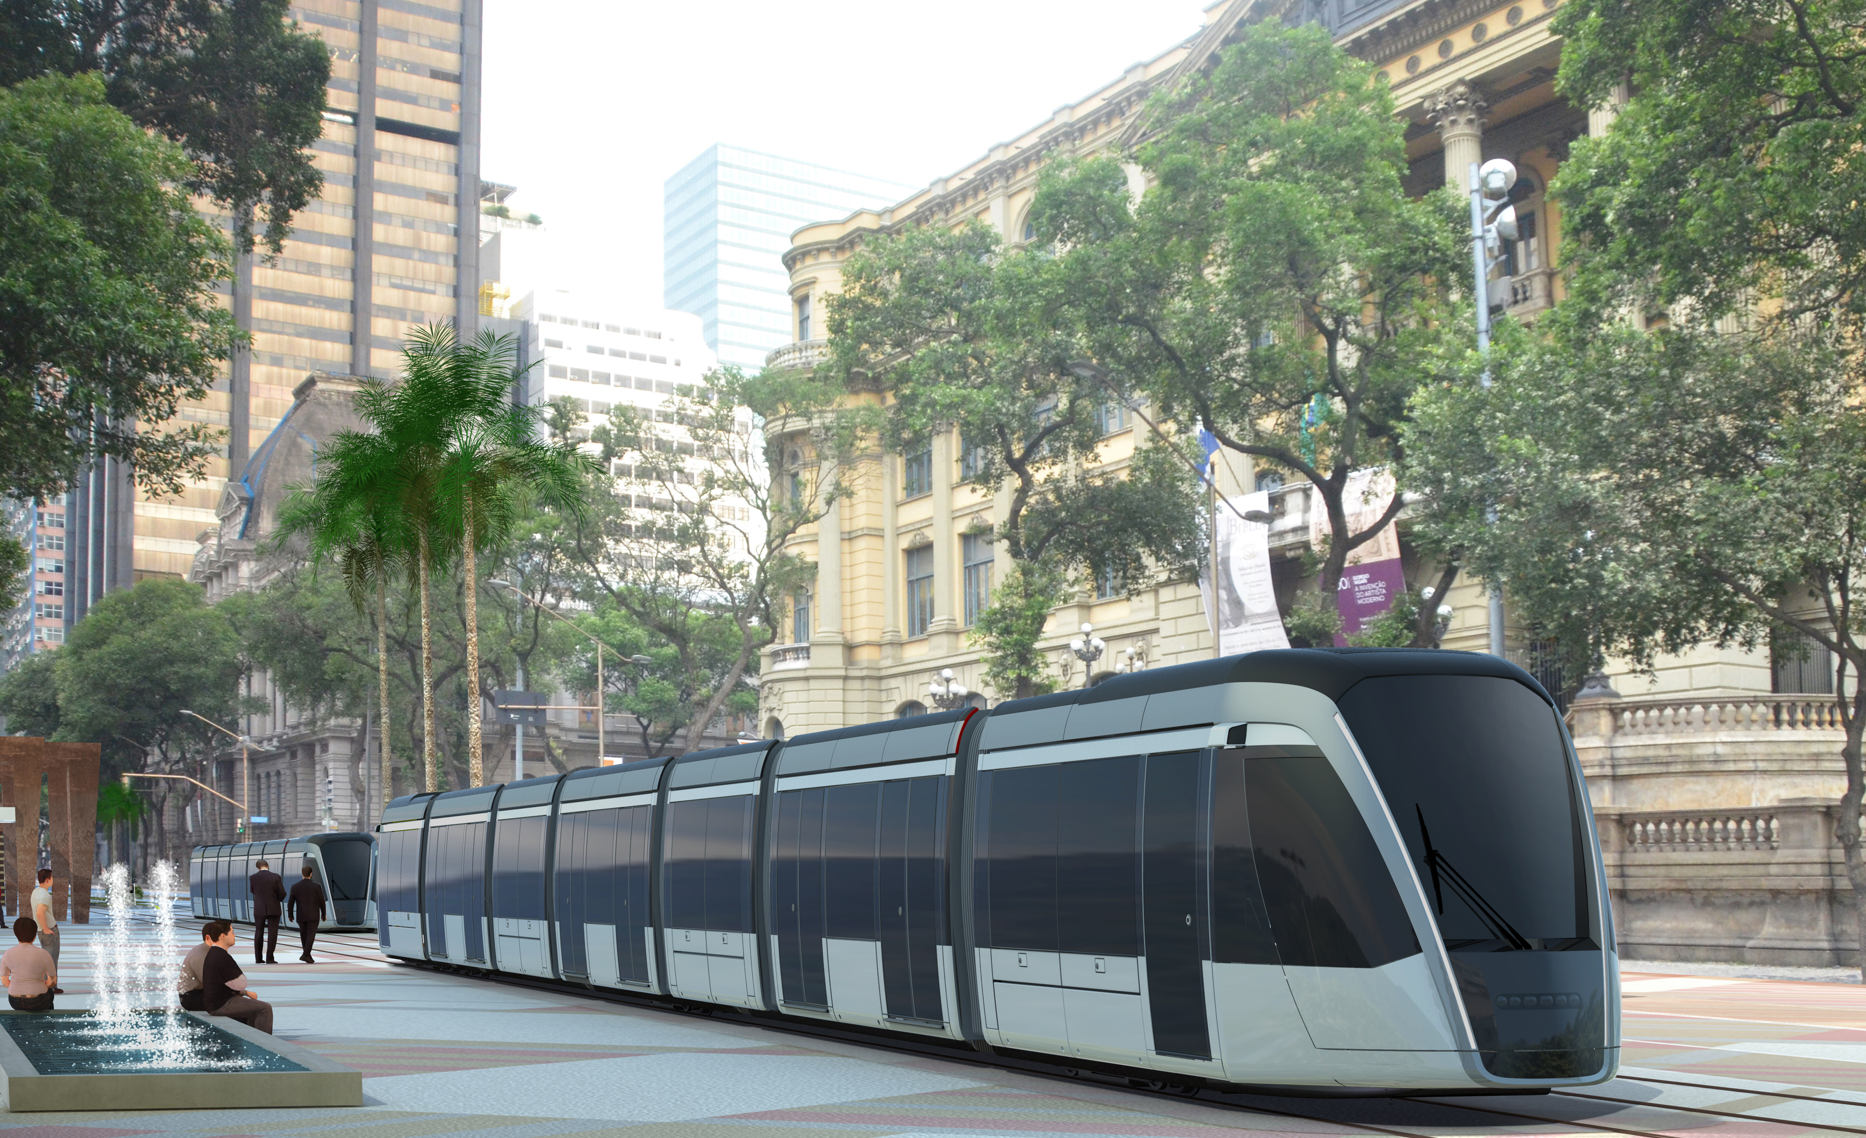 New Phase of Construction for Rio’s VLT Train System